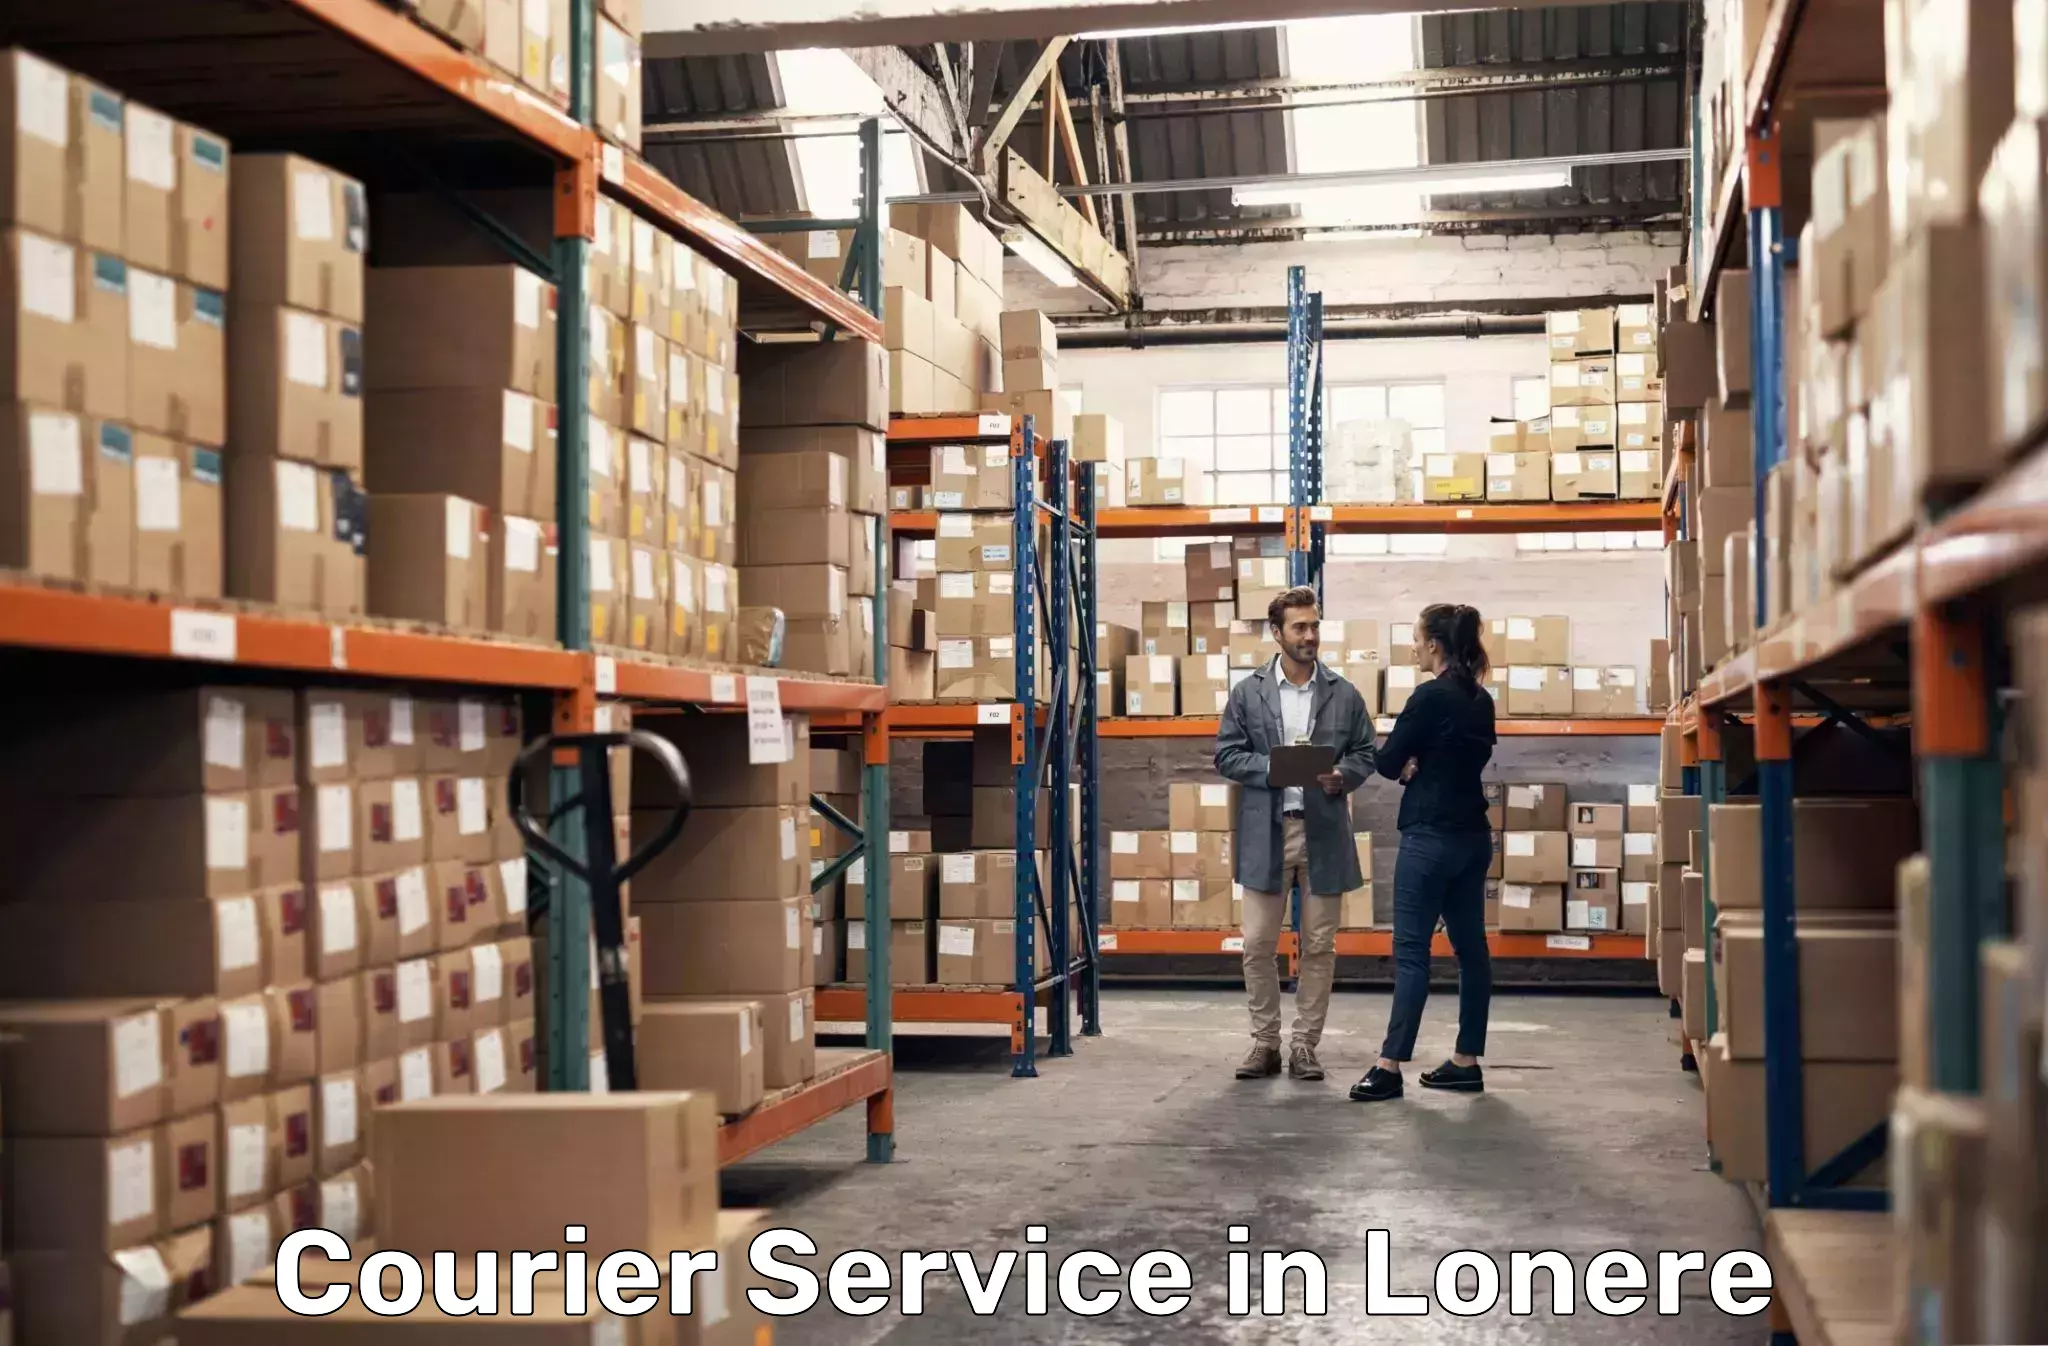 Delivery service partnership in Lonere